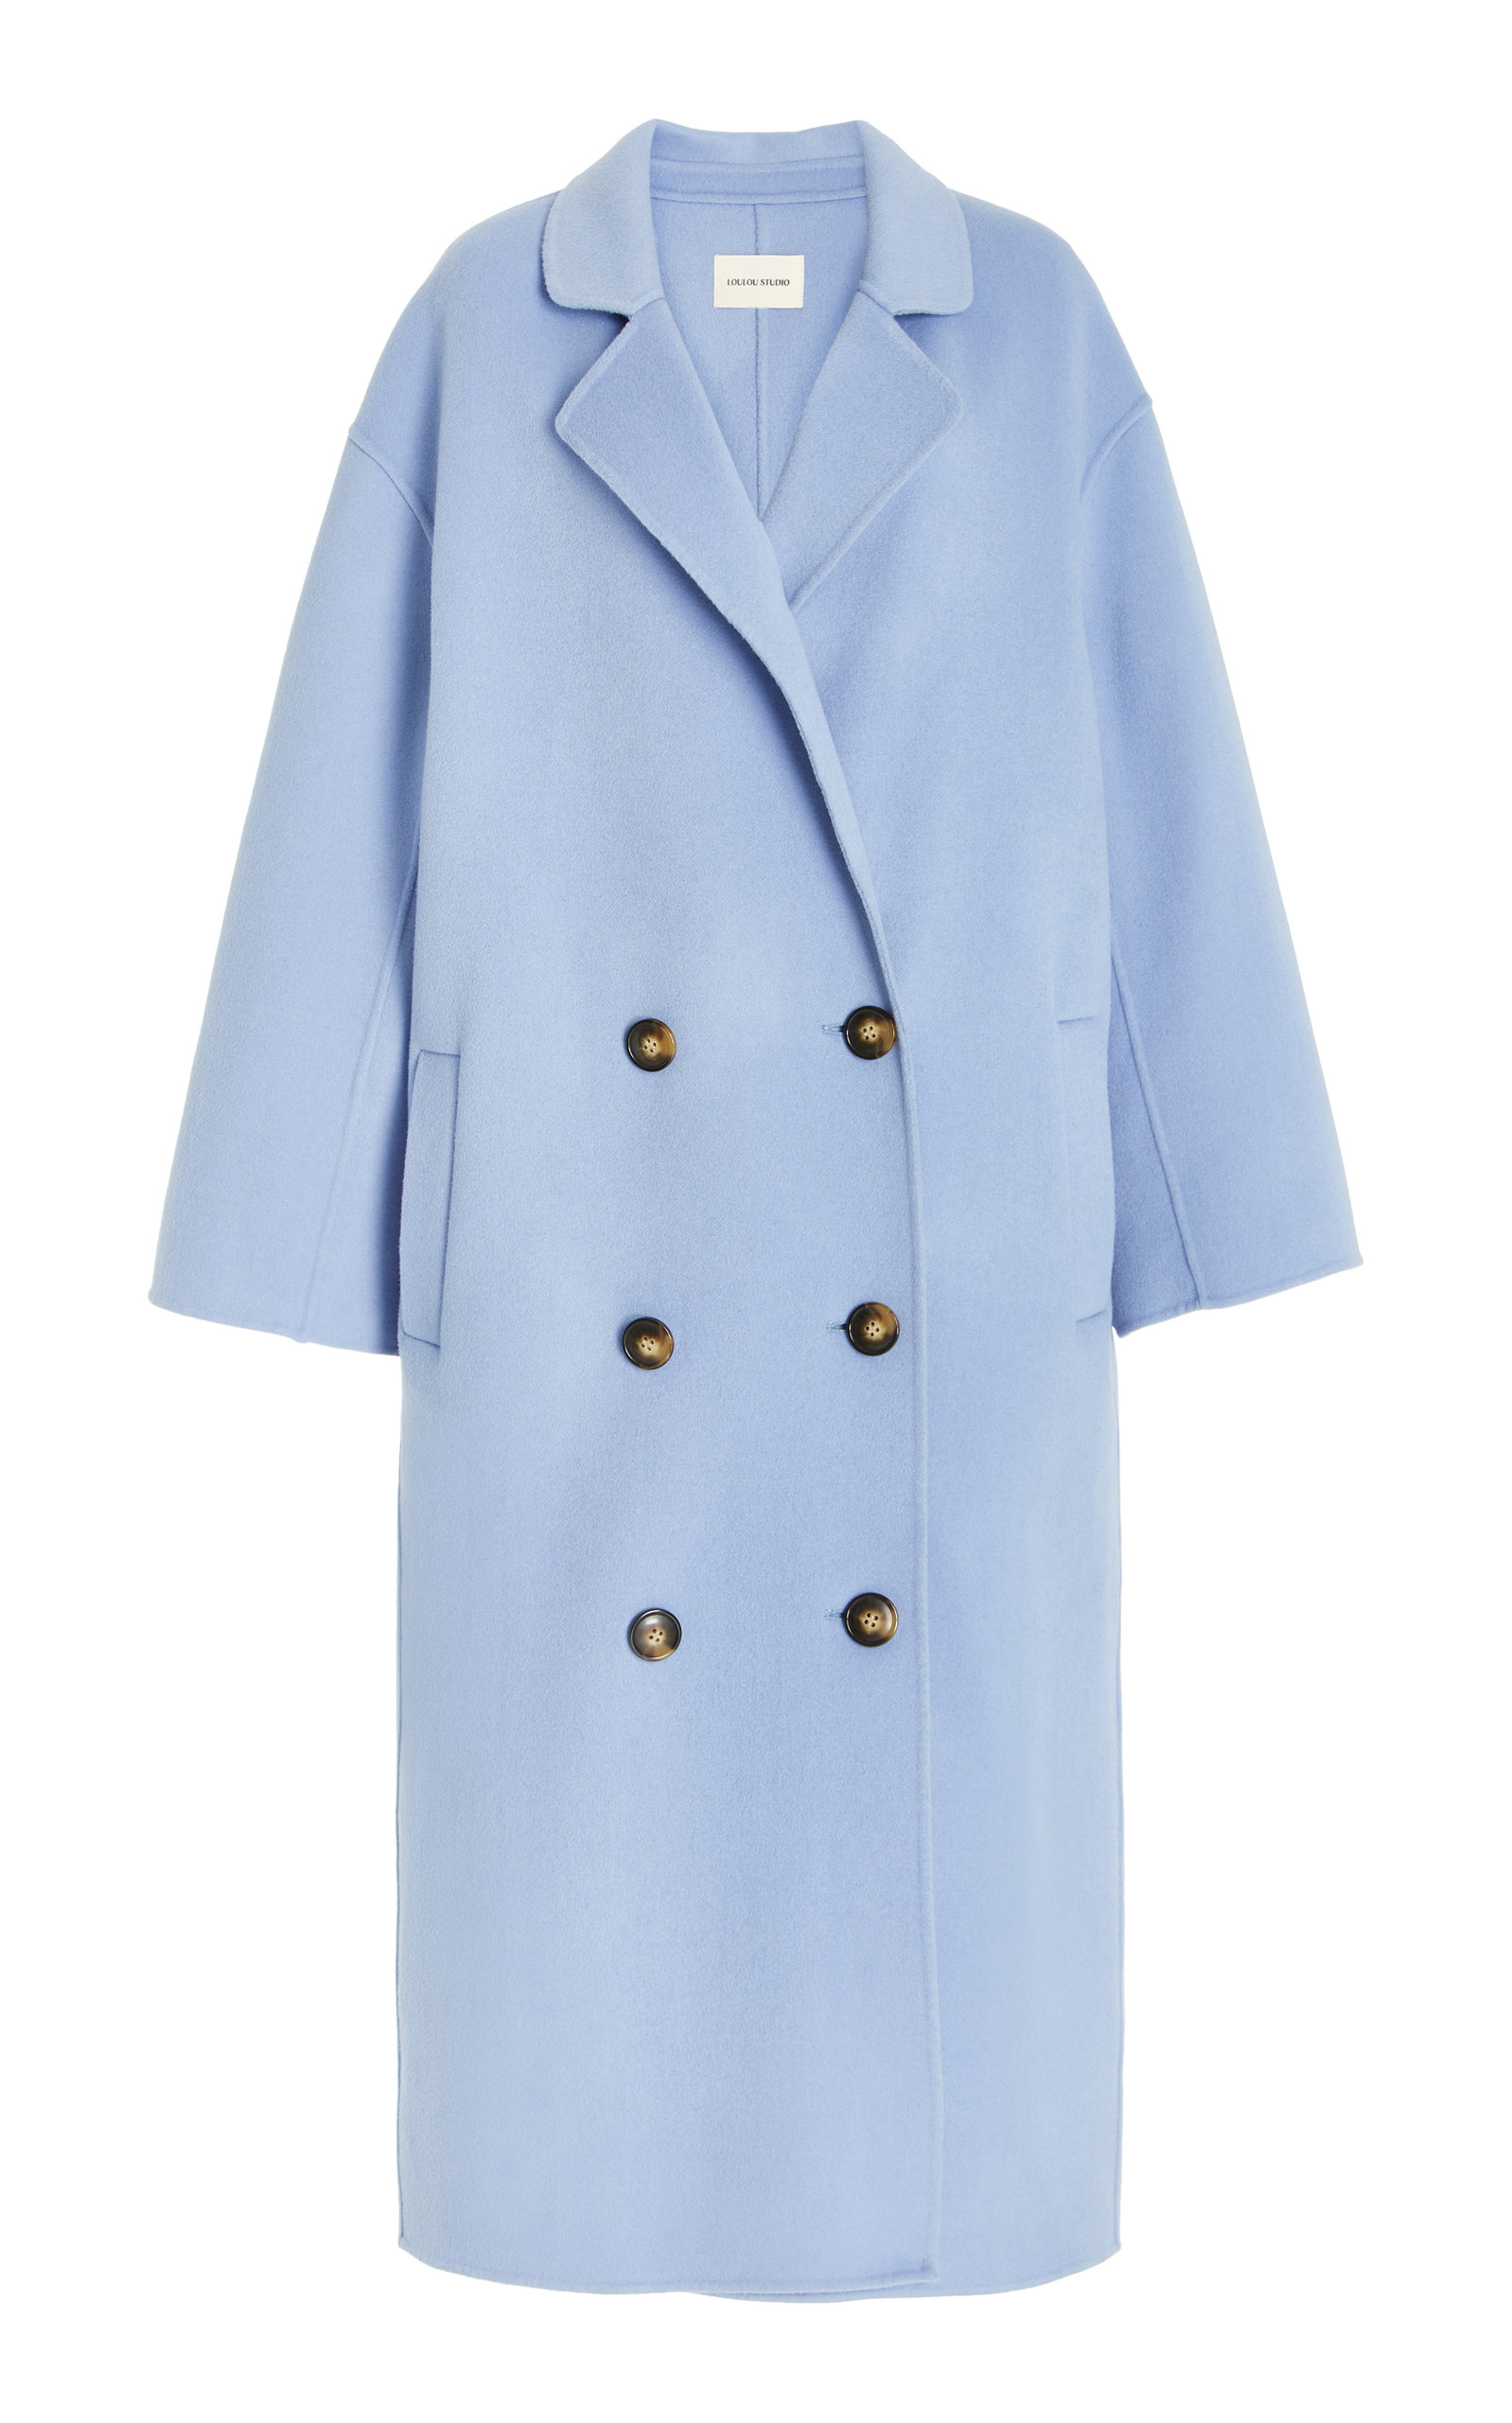 Loulou Studio Women's Wool And Cashmere-Blend Trench Coat